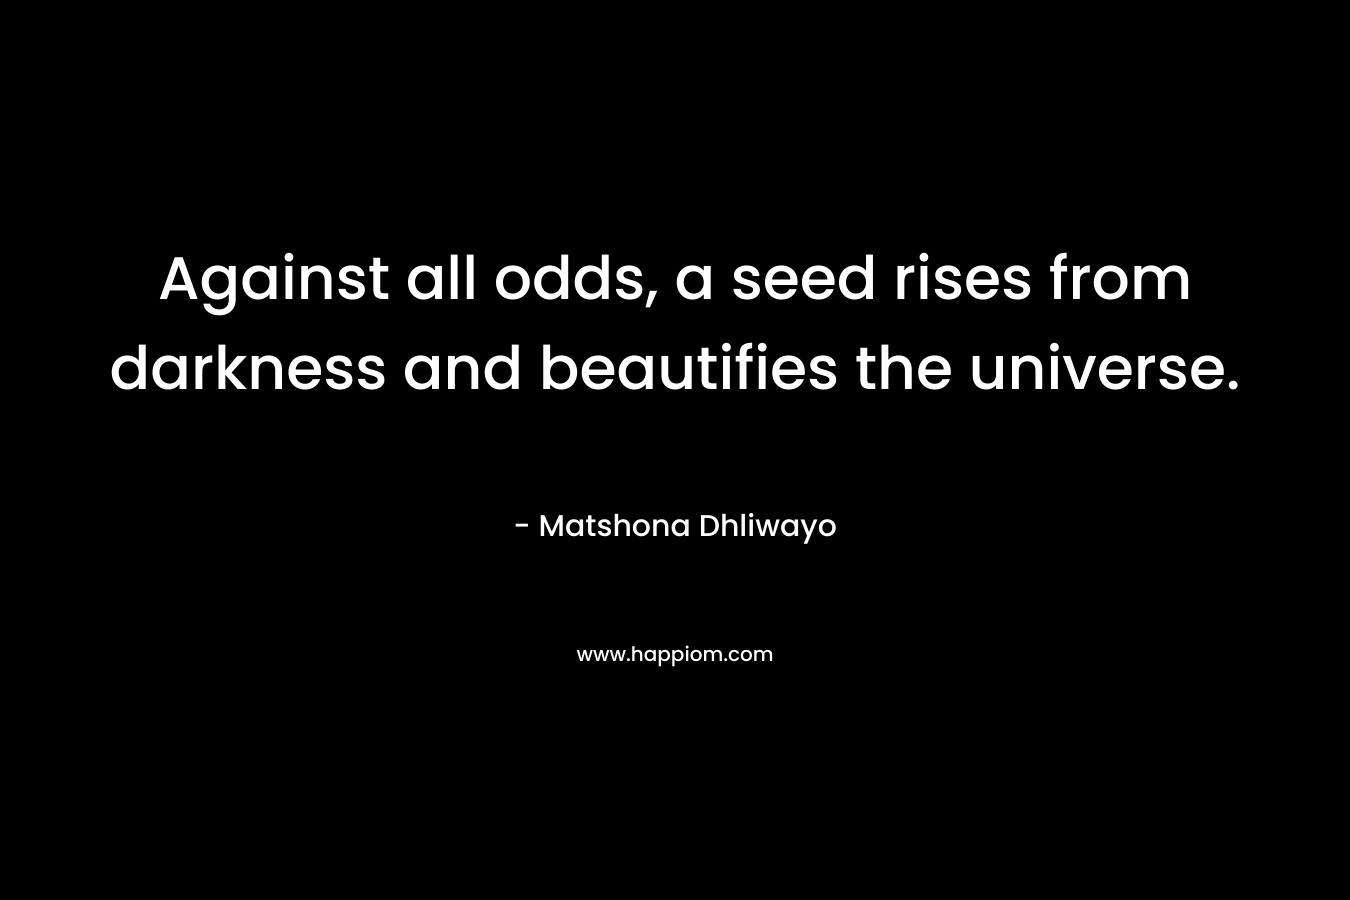 Against all odds, a seed rises from darkness and beautifies the universe.